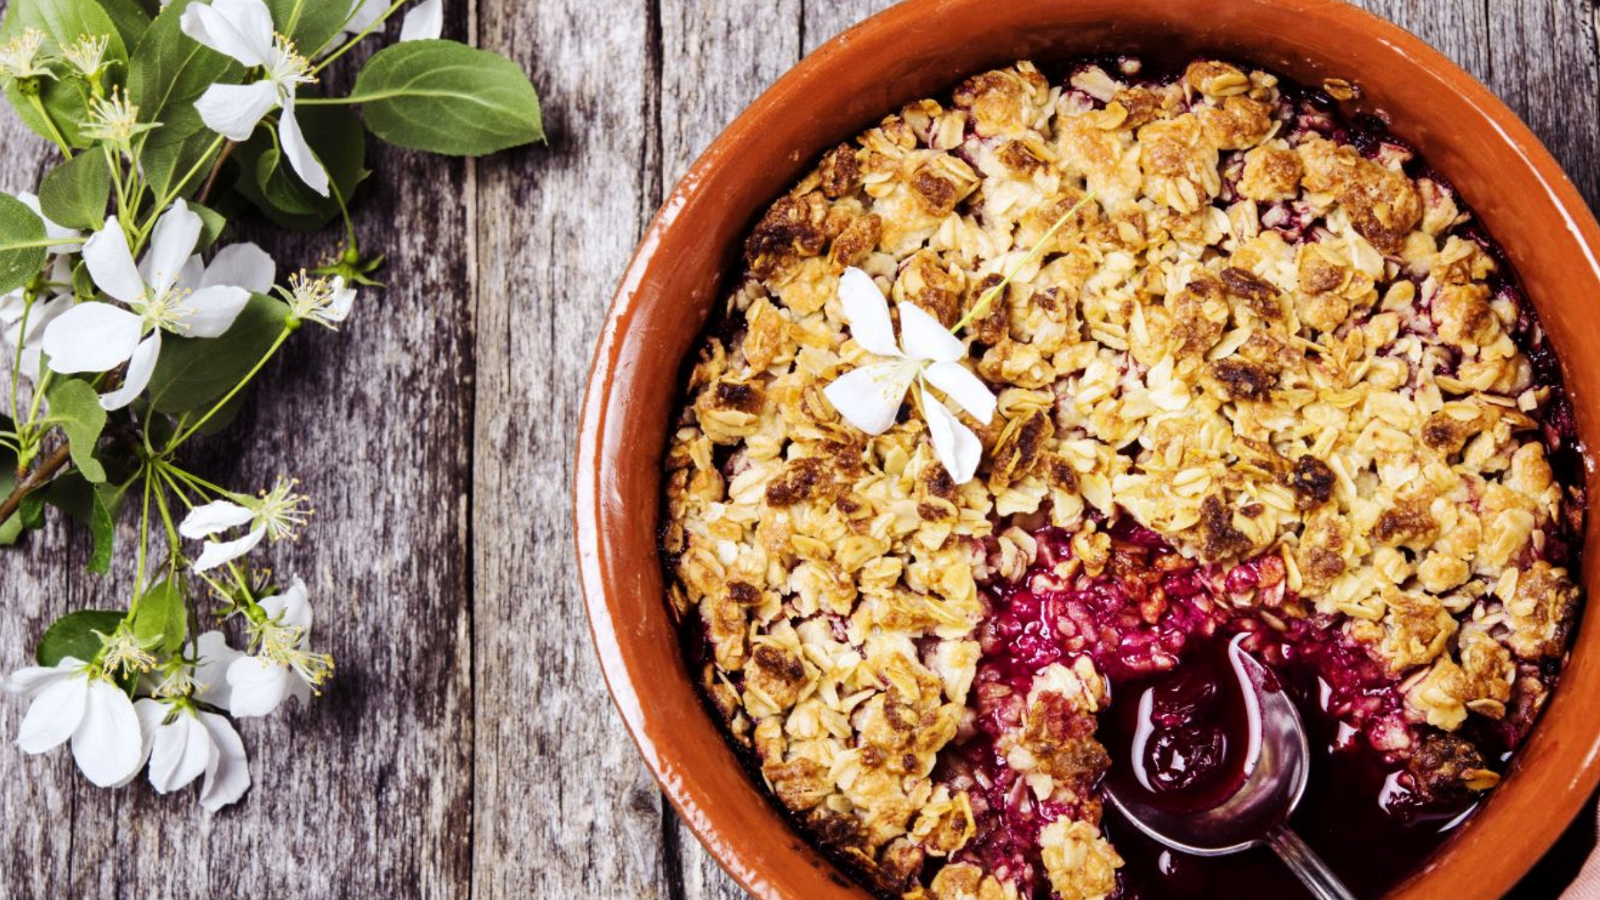 Image of Mixed Berry Crumble